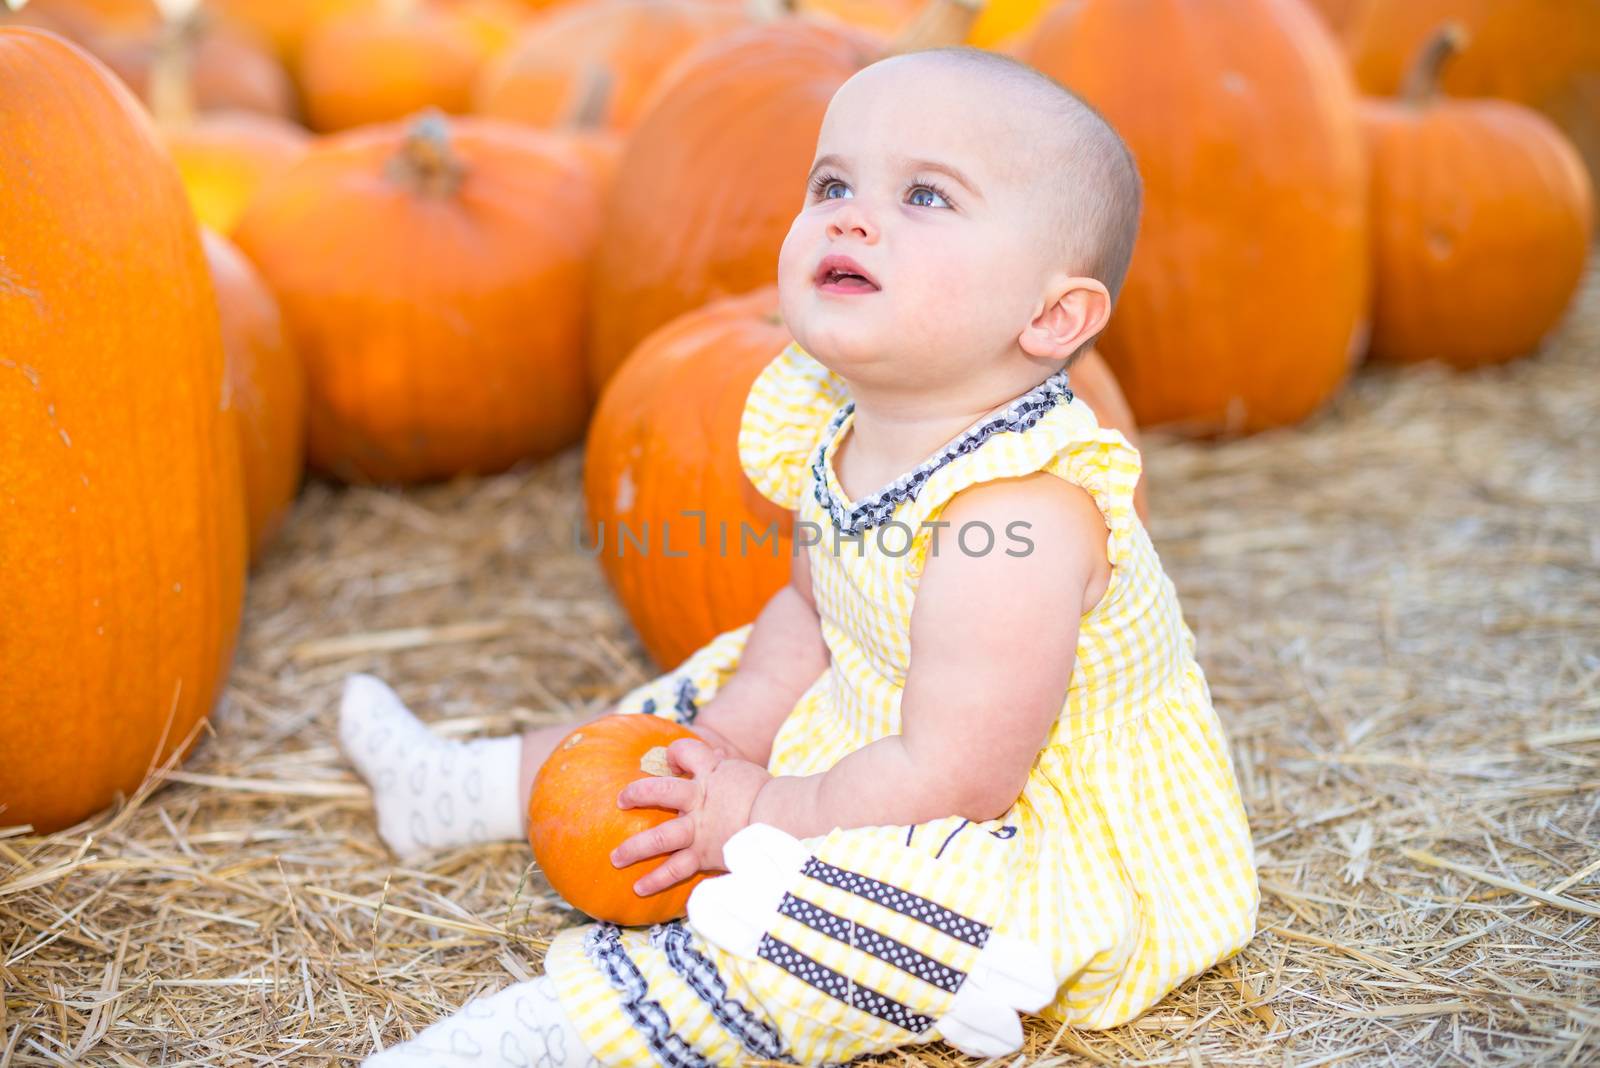 Adorable Baby in Pumpkin Patch by DJHolmes86